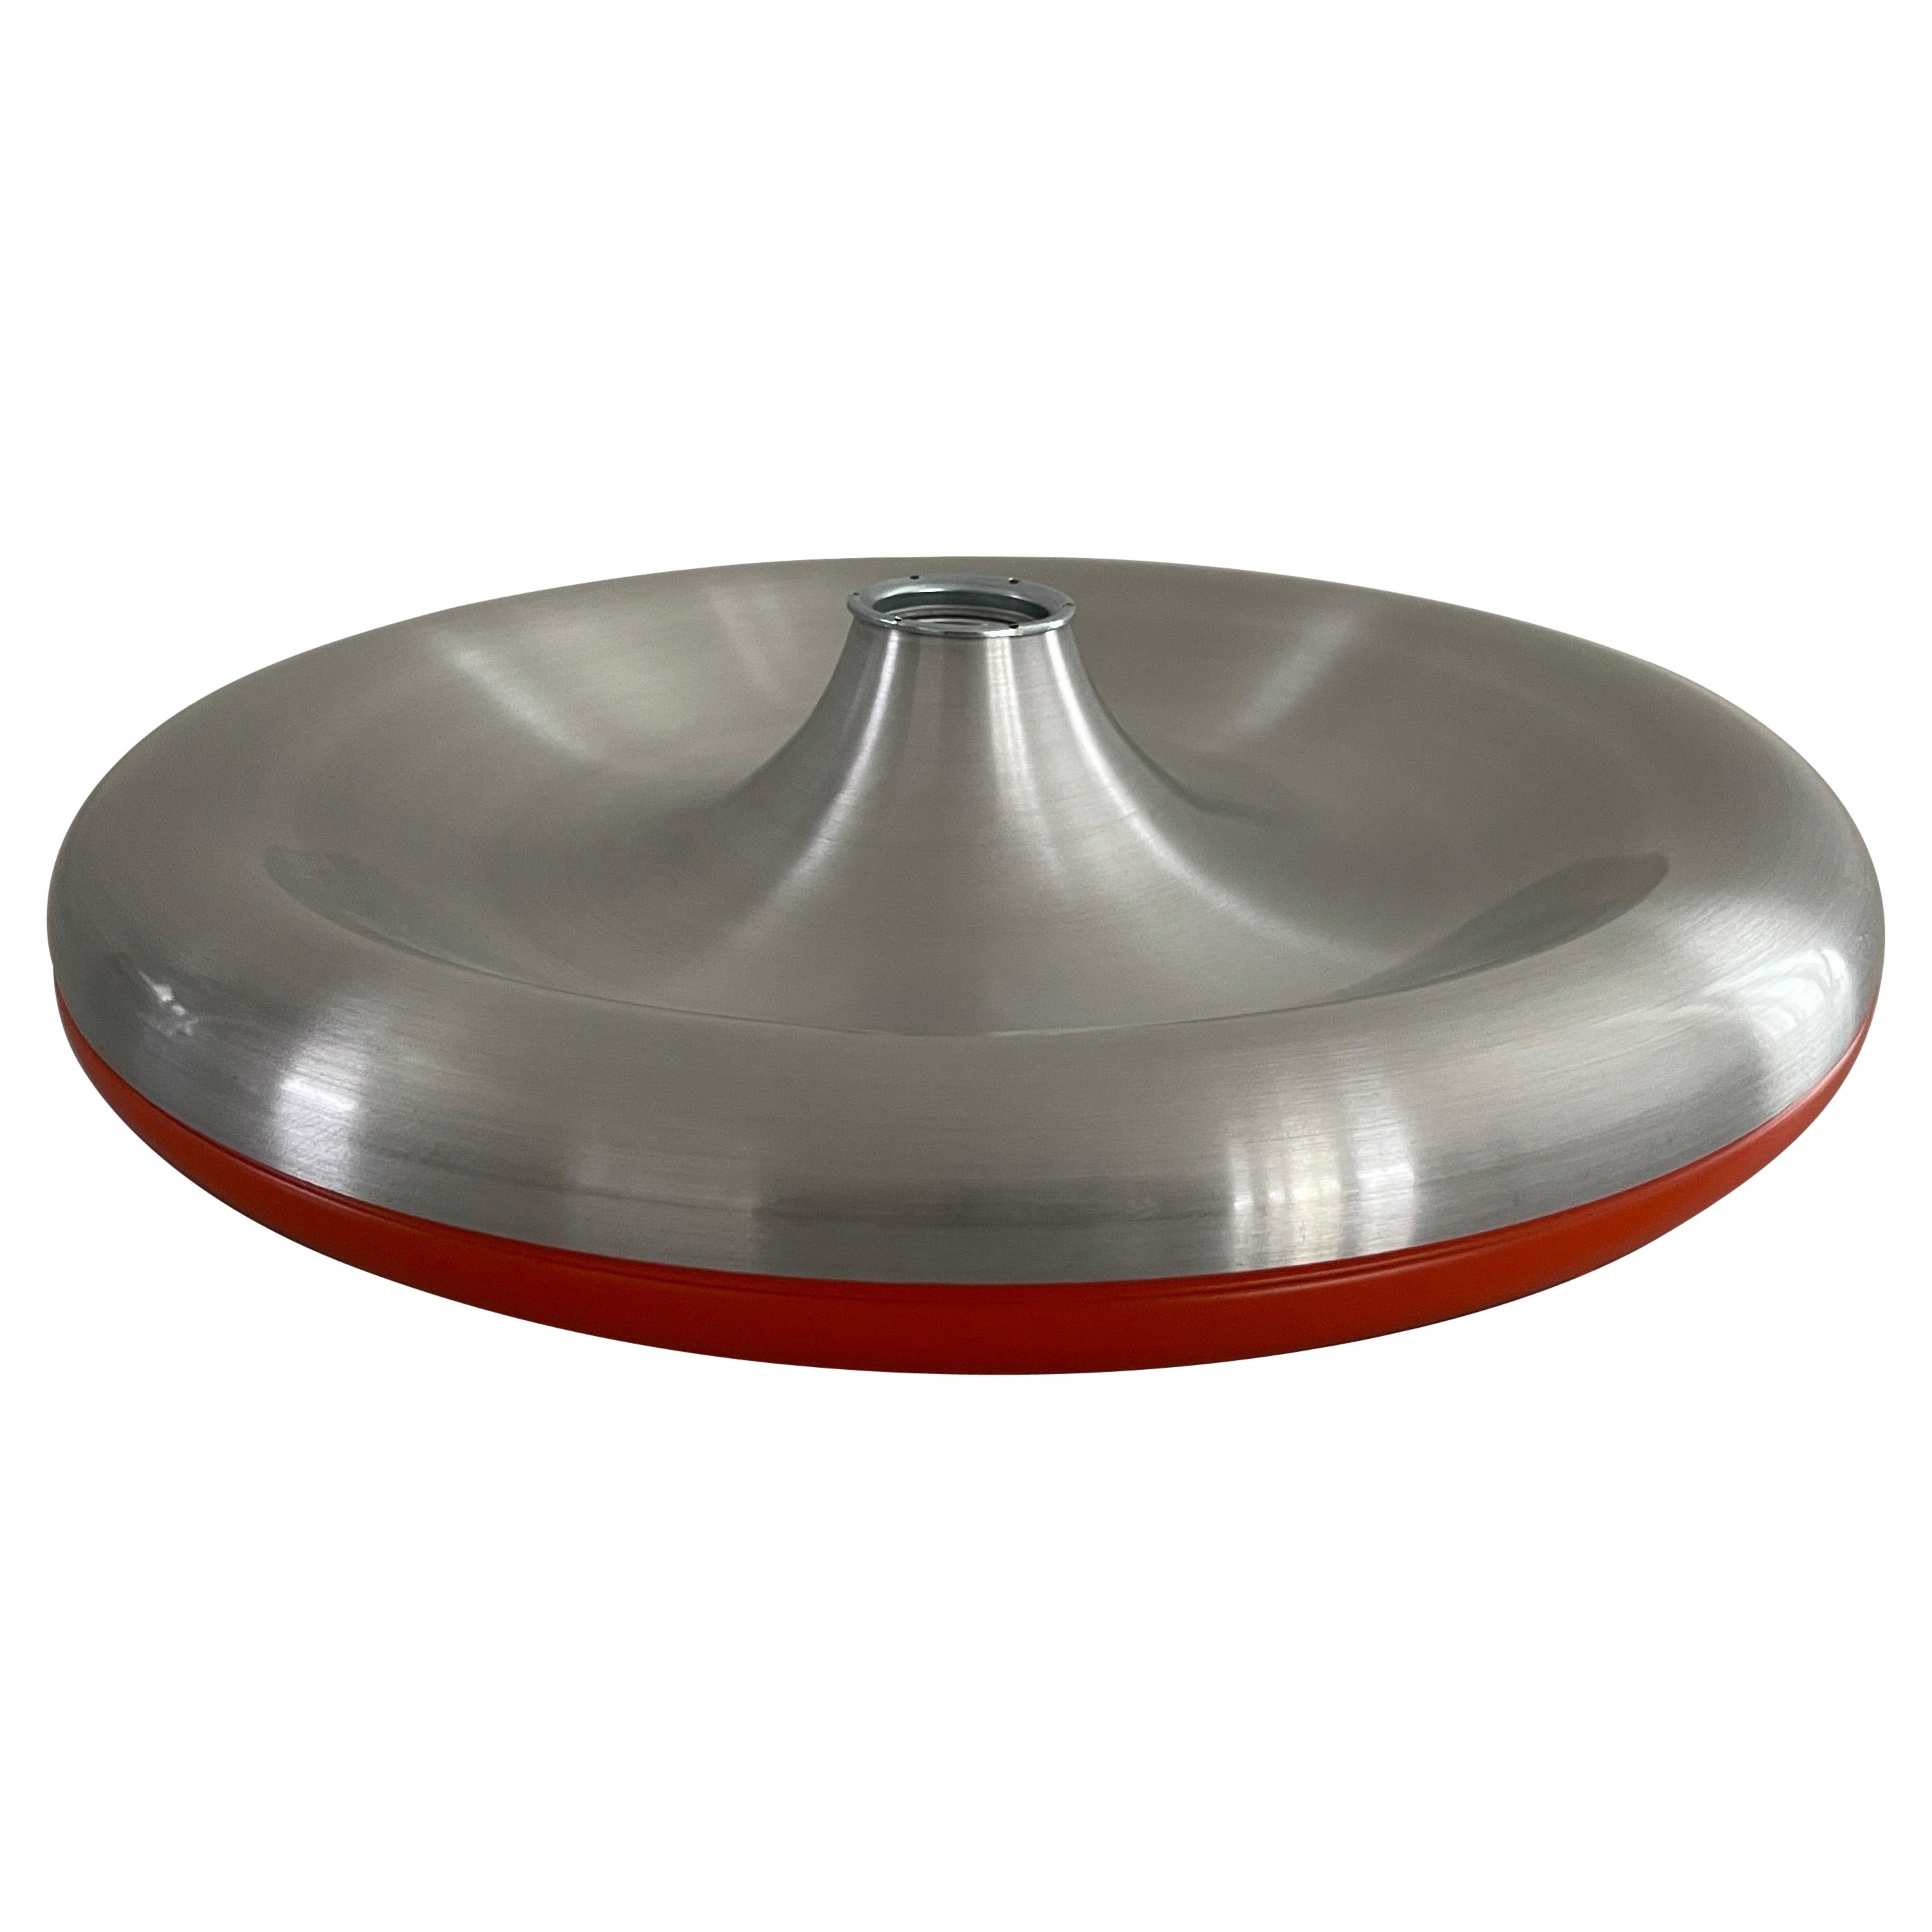 Metallic Grey and Orange Space Age Flush Mount Ceiling Lamp, 1970s, Germany For Sale